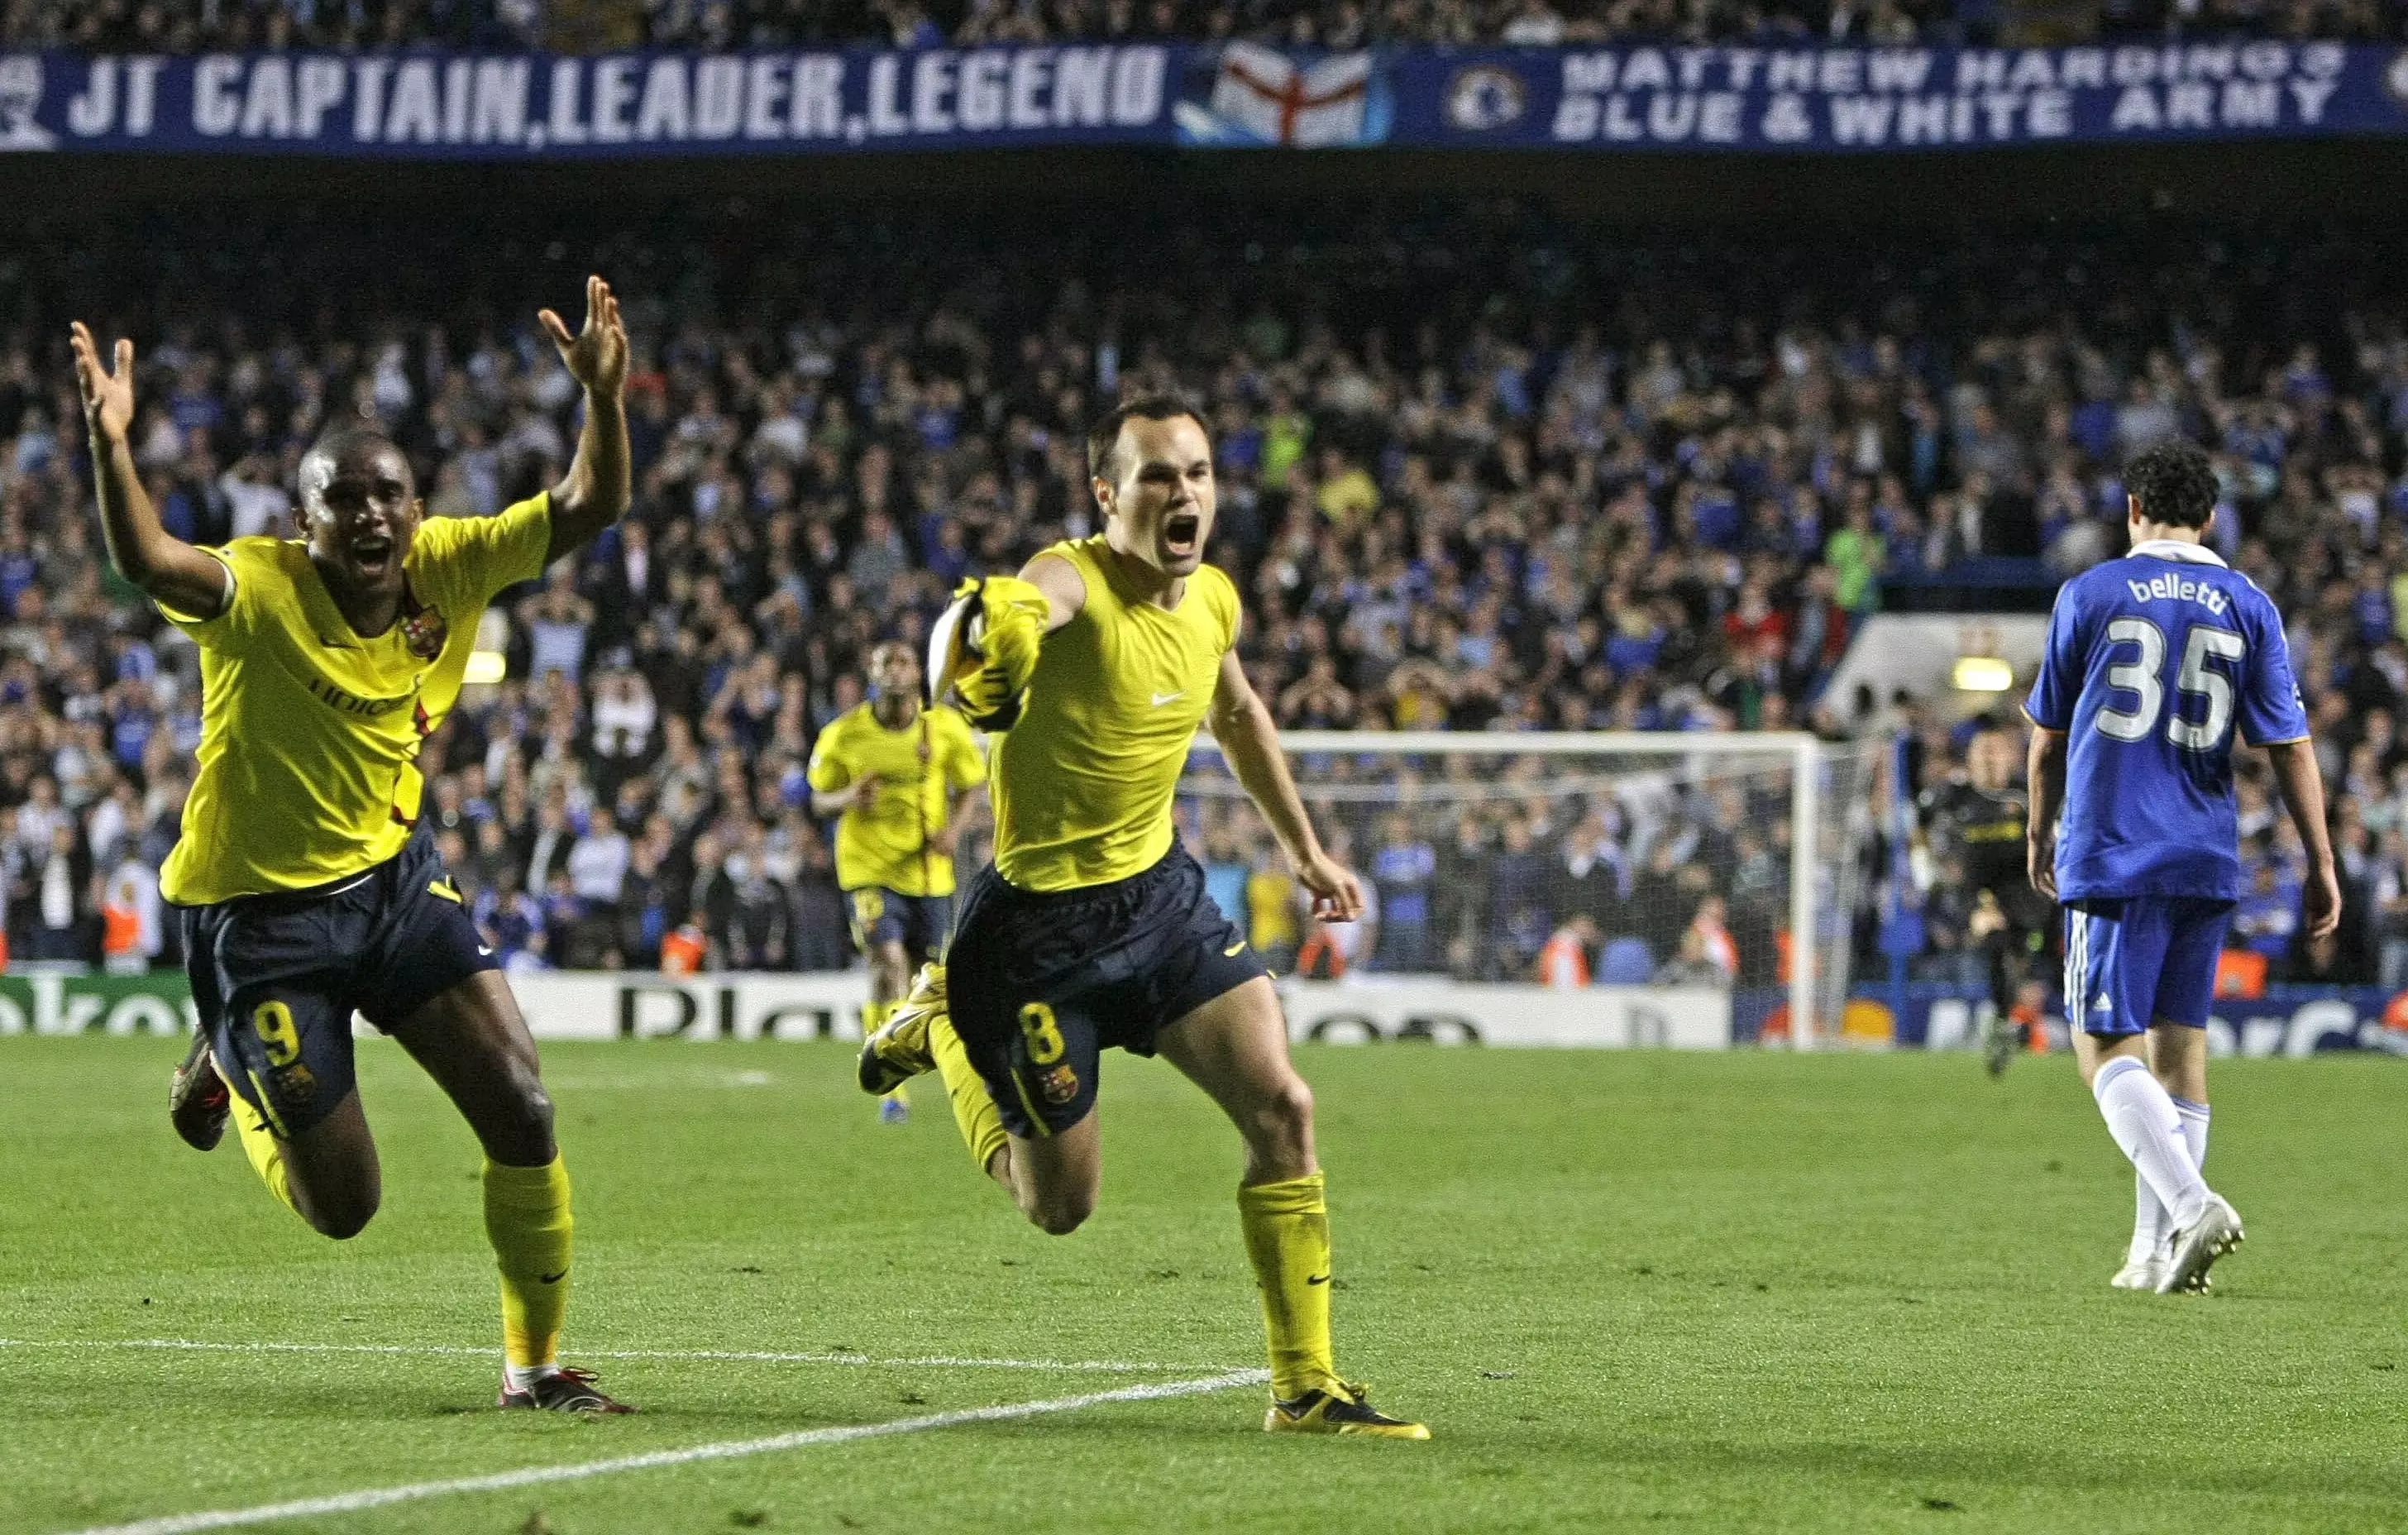 Iniesta wheels away in celebration after breaking Chelsea hearts in the last minute of stoppage time. Image: PA